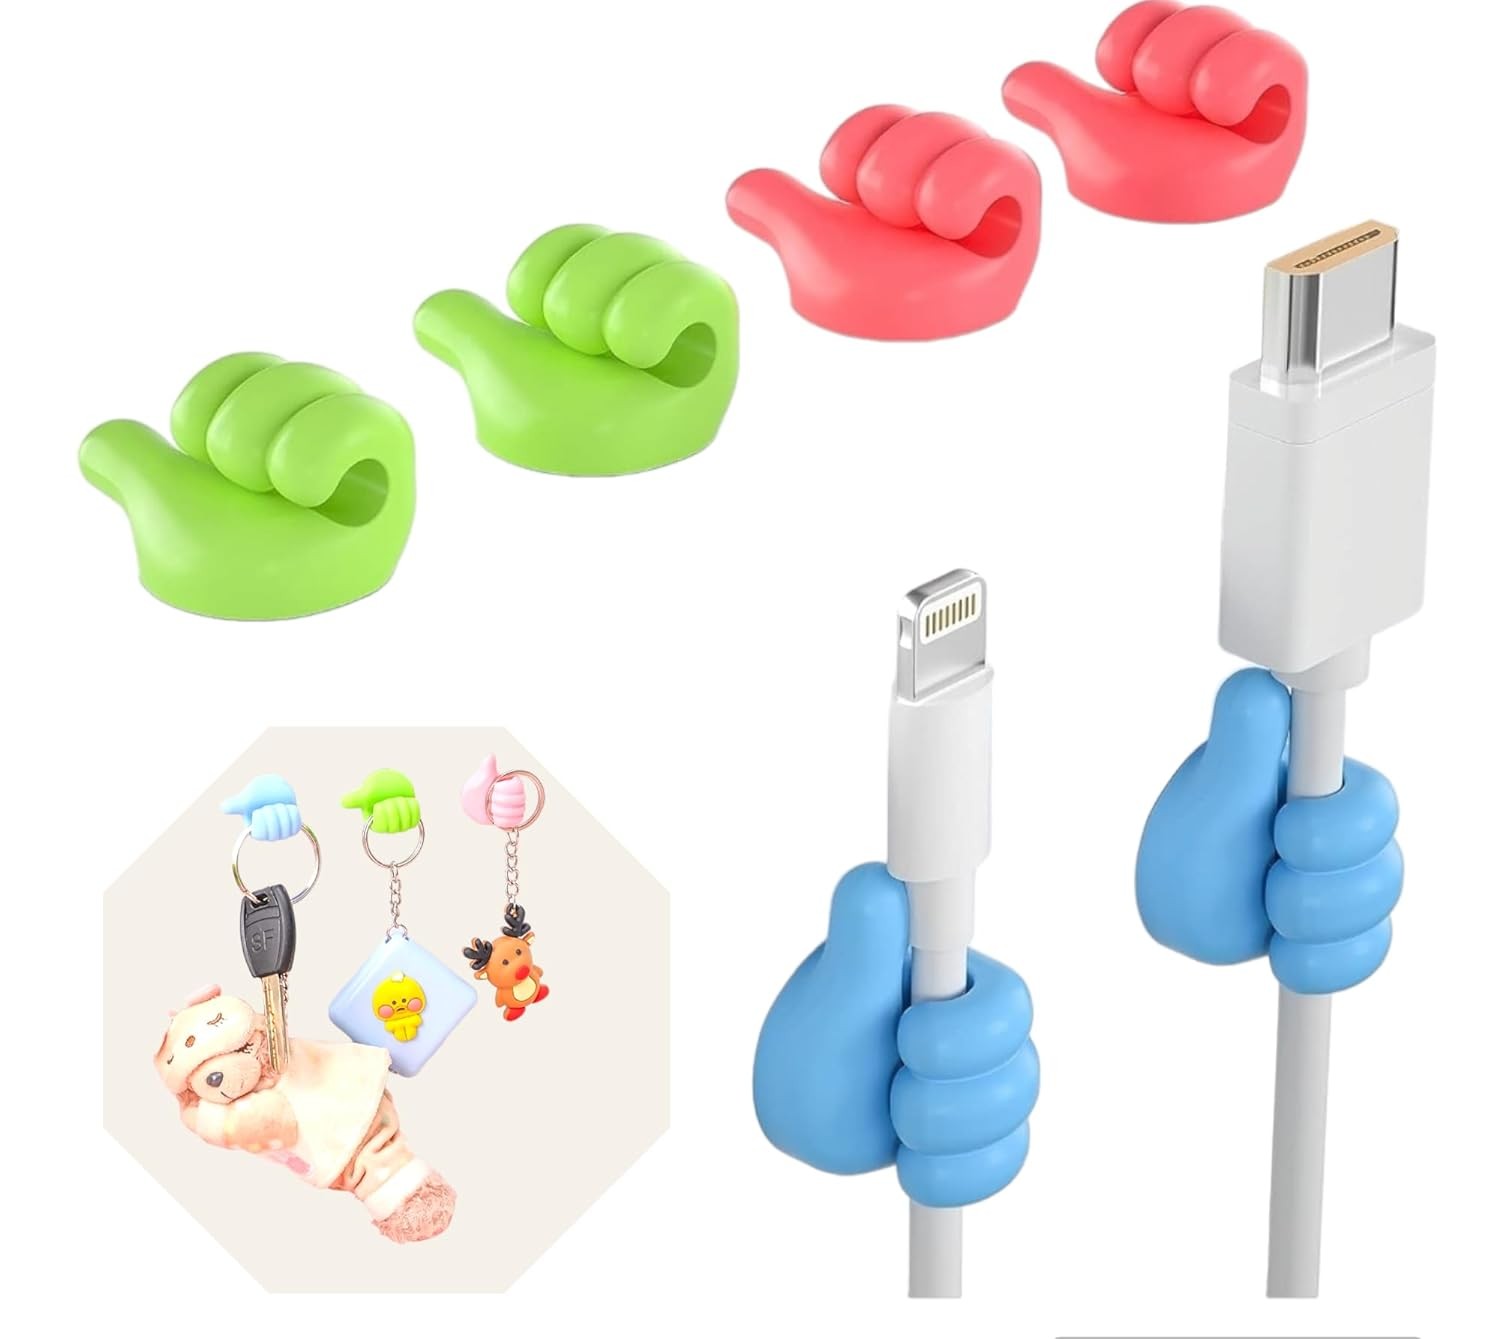 P&S Silicon Adhesive Thumb Wall Hooks Multifunctional Cute Utility Holders Cable Clip Earphones Cord Hanger for Home Office (Pack of 10)